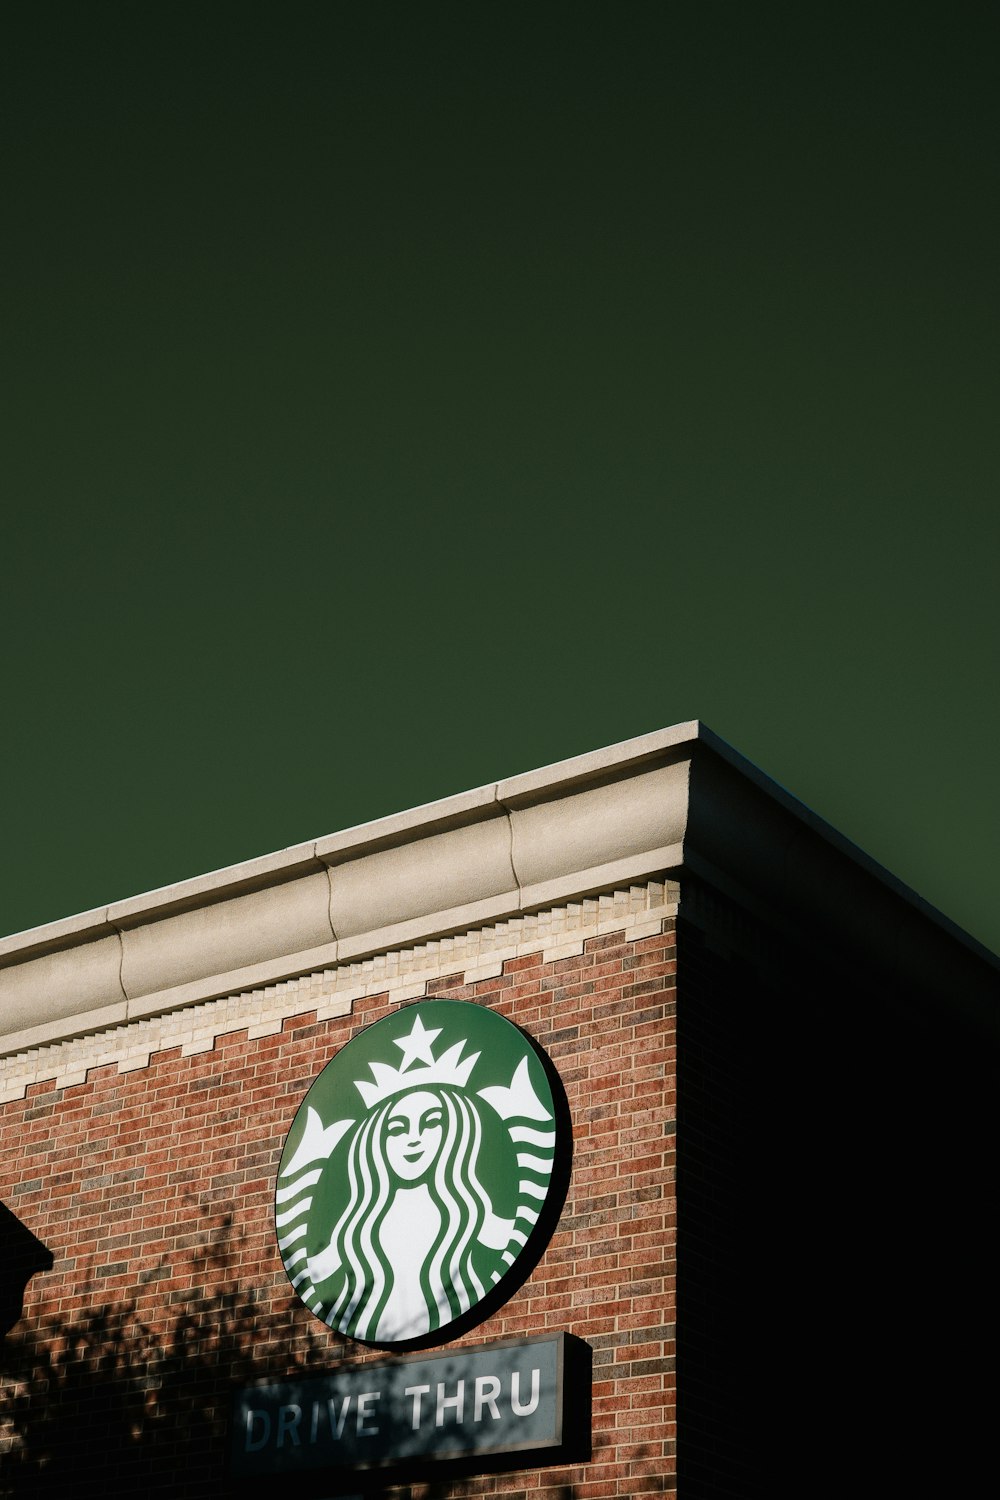 a starbucks sign on the side of a brick building